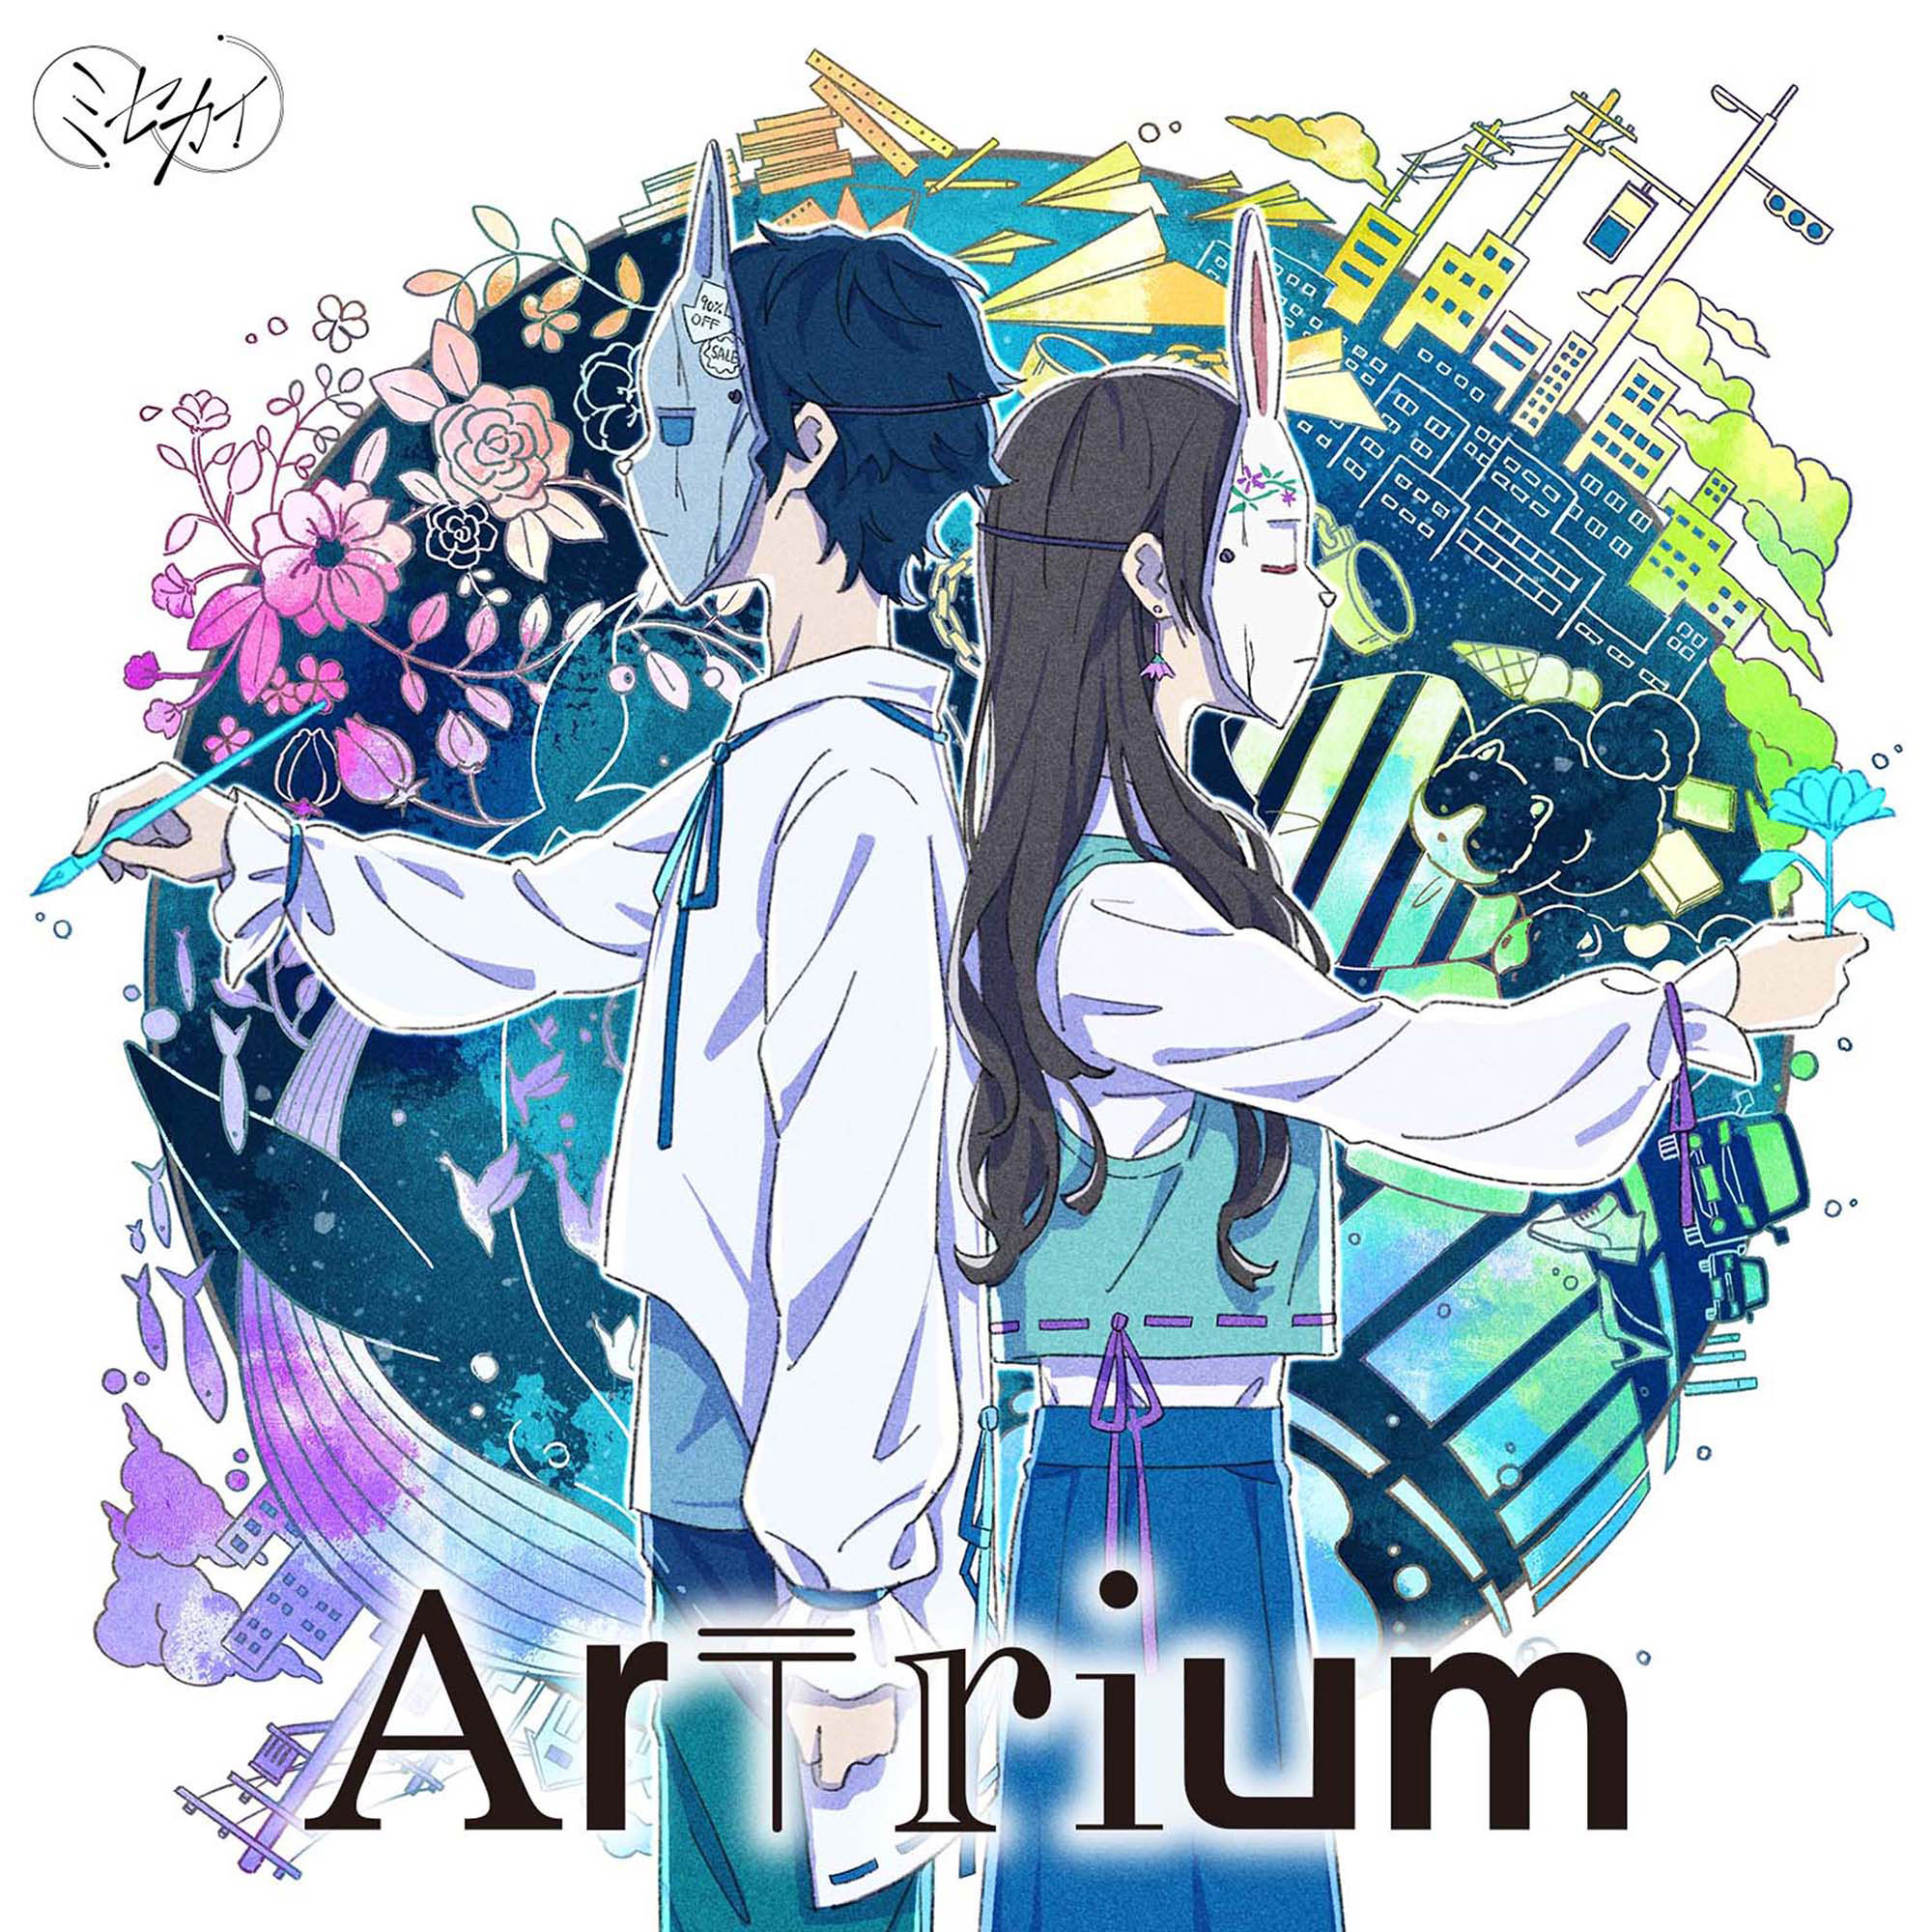 Misekai ”Artrium” Limited Edition (CD+DVD) Release on February 7th, 2024 No.1